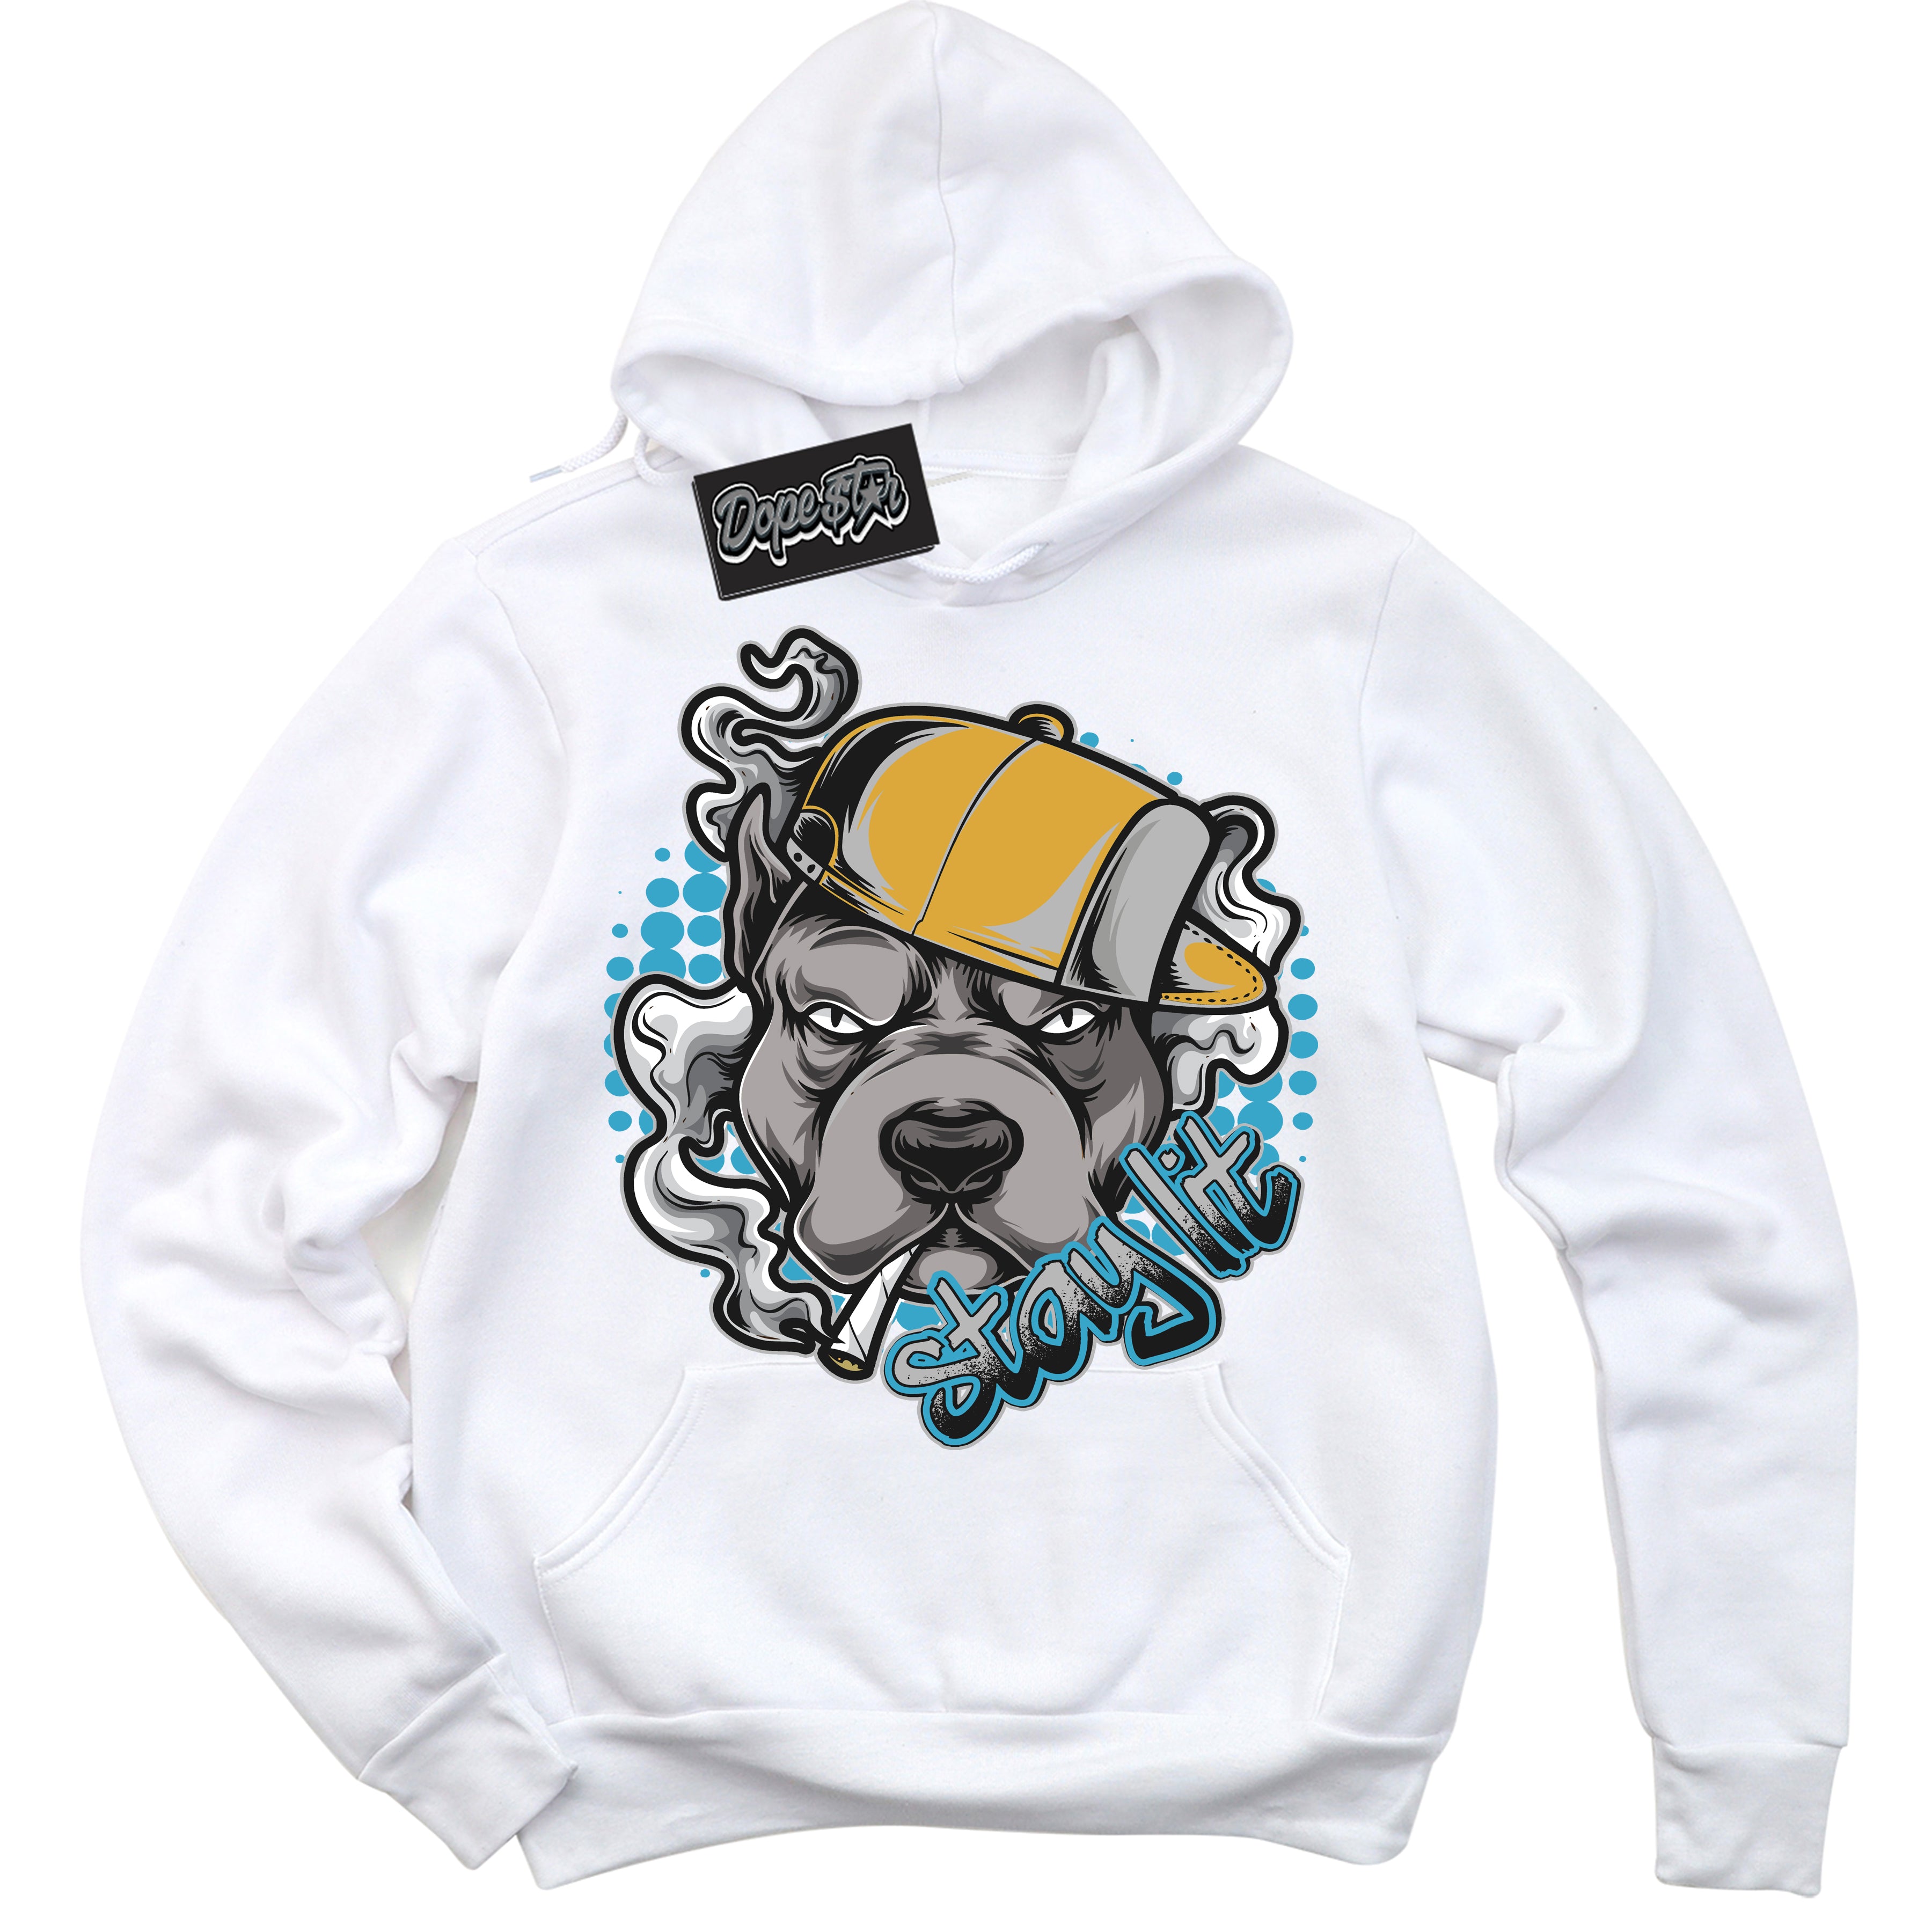 Cool White Graphic Hoodie with “ Stay Lit “ print, that perfectly matches Air Jordan 5 AQUA  sneakers